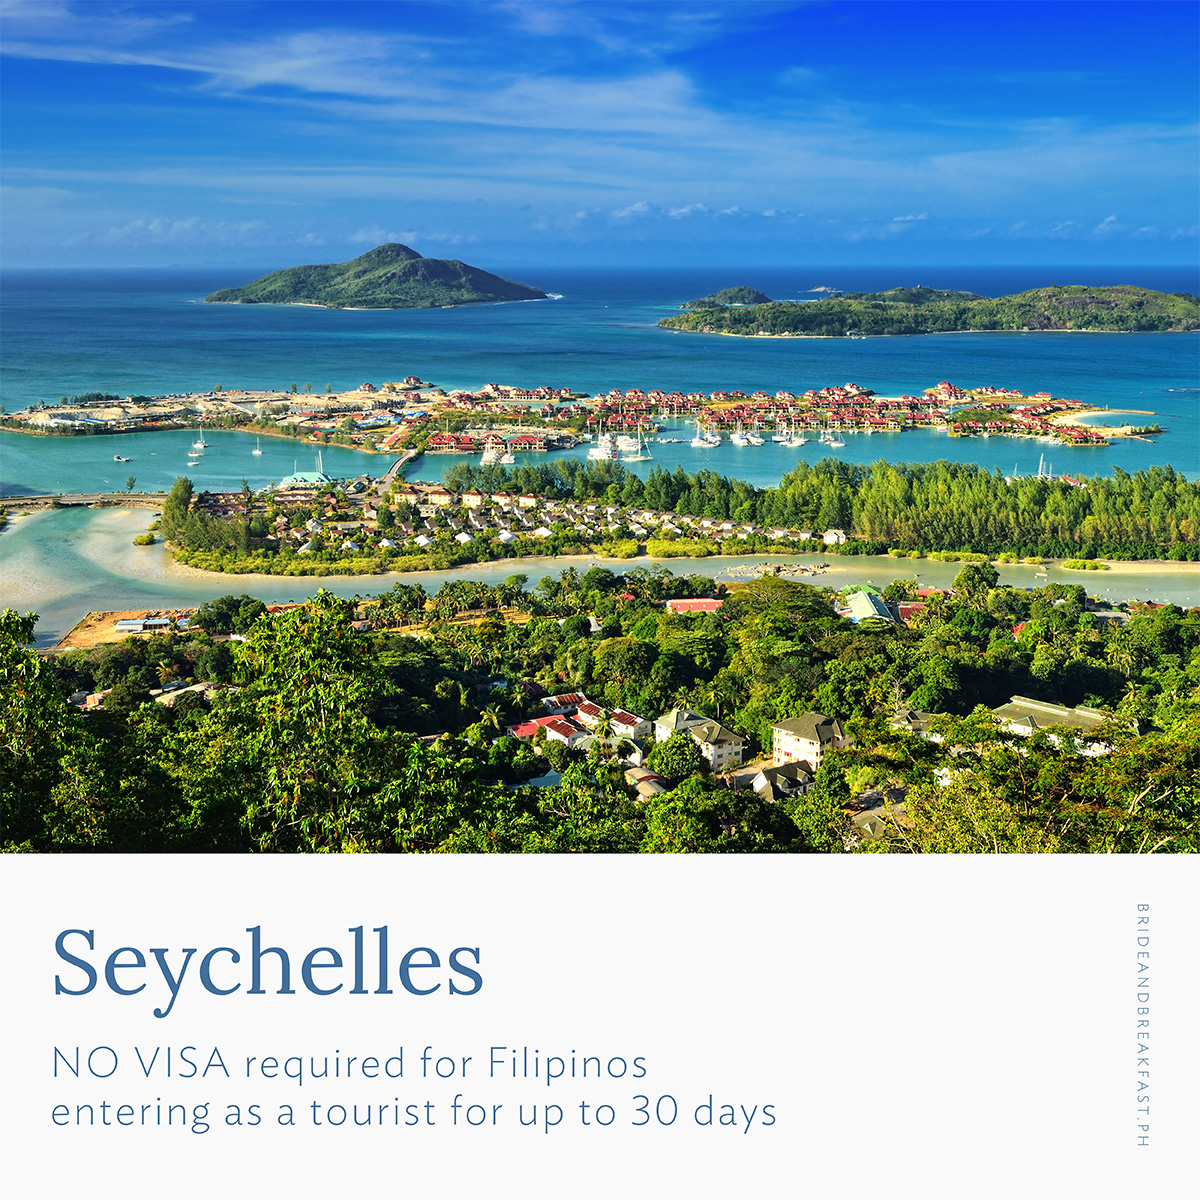 SEYCHELLES Visa Requirement: NO VISA required for Filipinos entering as a tourist for up to 30 days